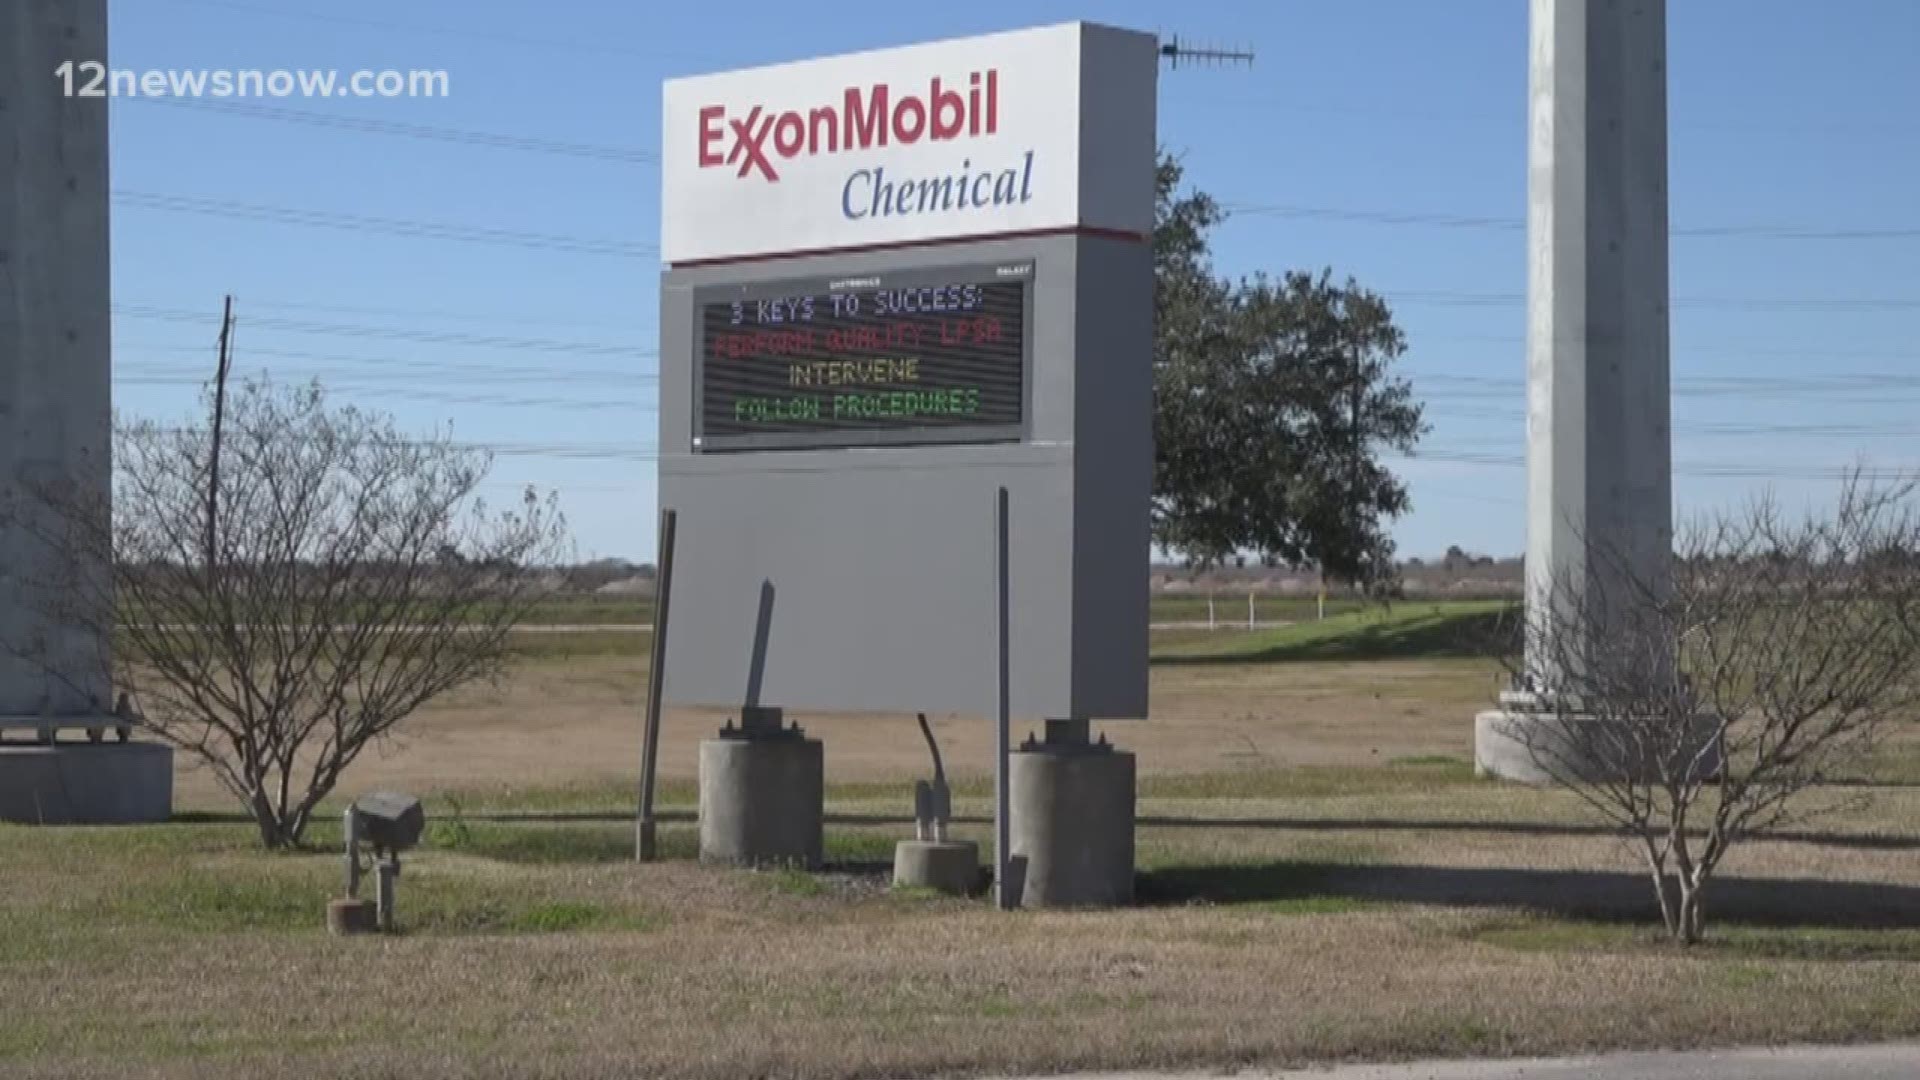 ExxonMobil announced production has started after the expansion project.